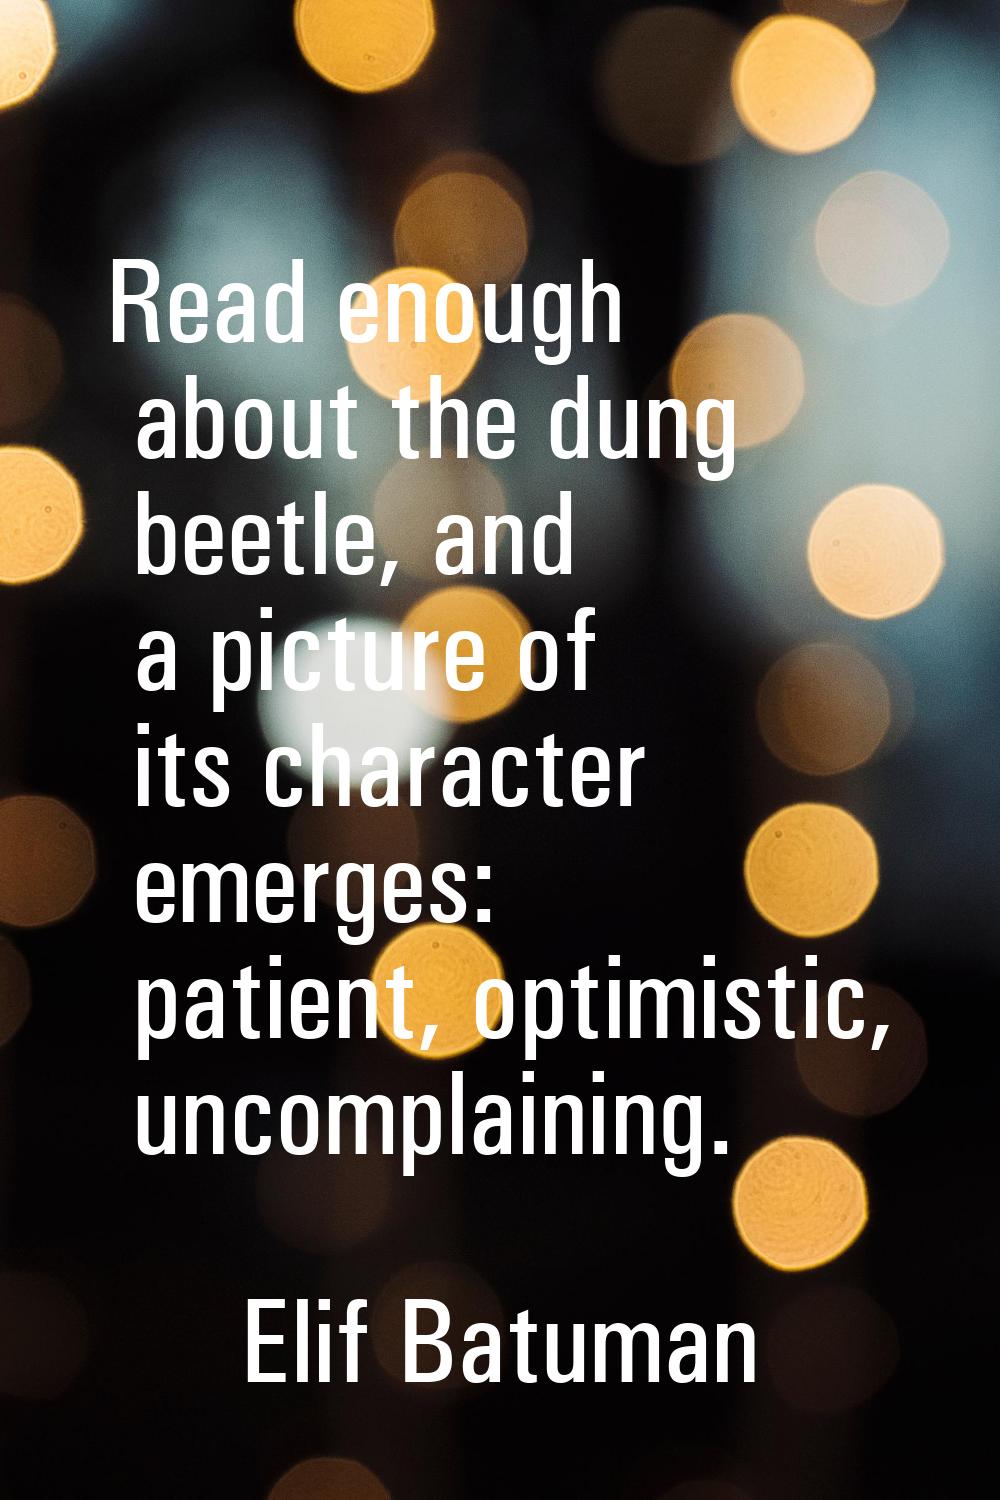 Read enough about the dung beetle, and a picture of its character emerges: patient, optimistic, unc